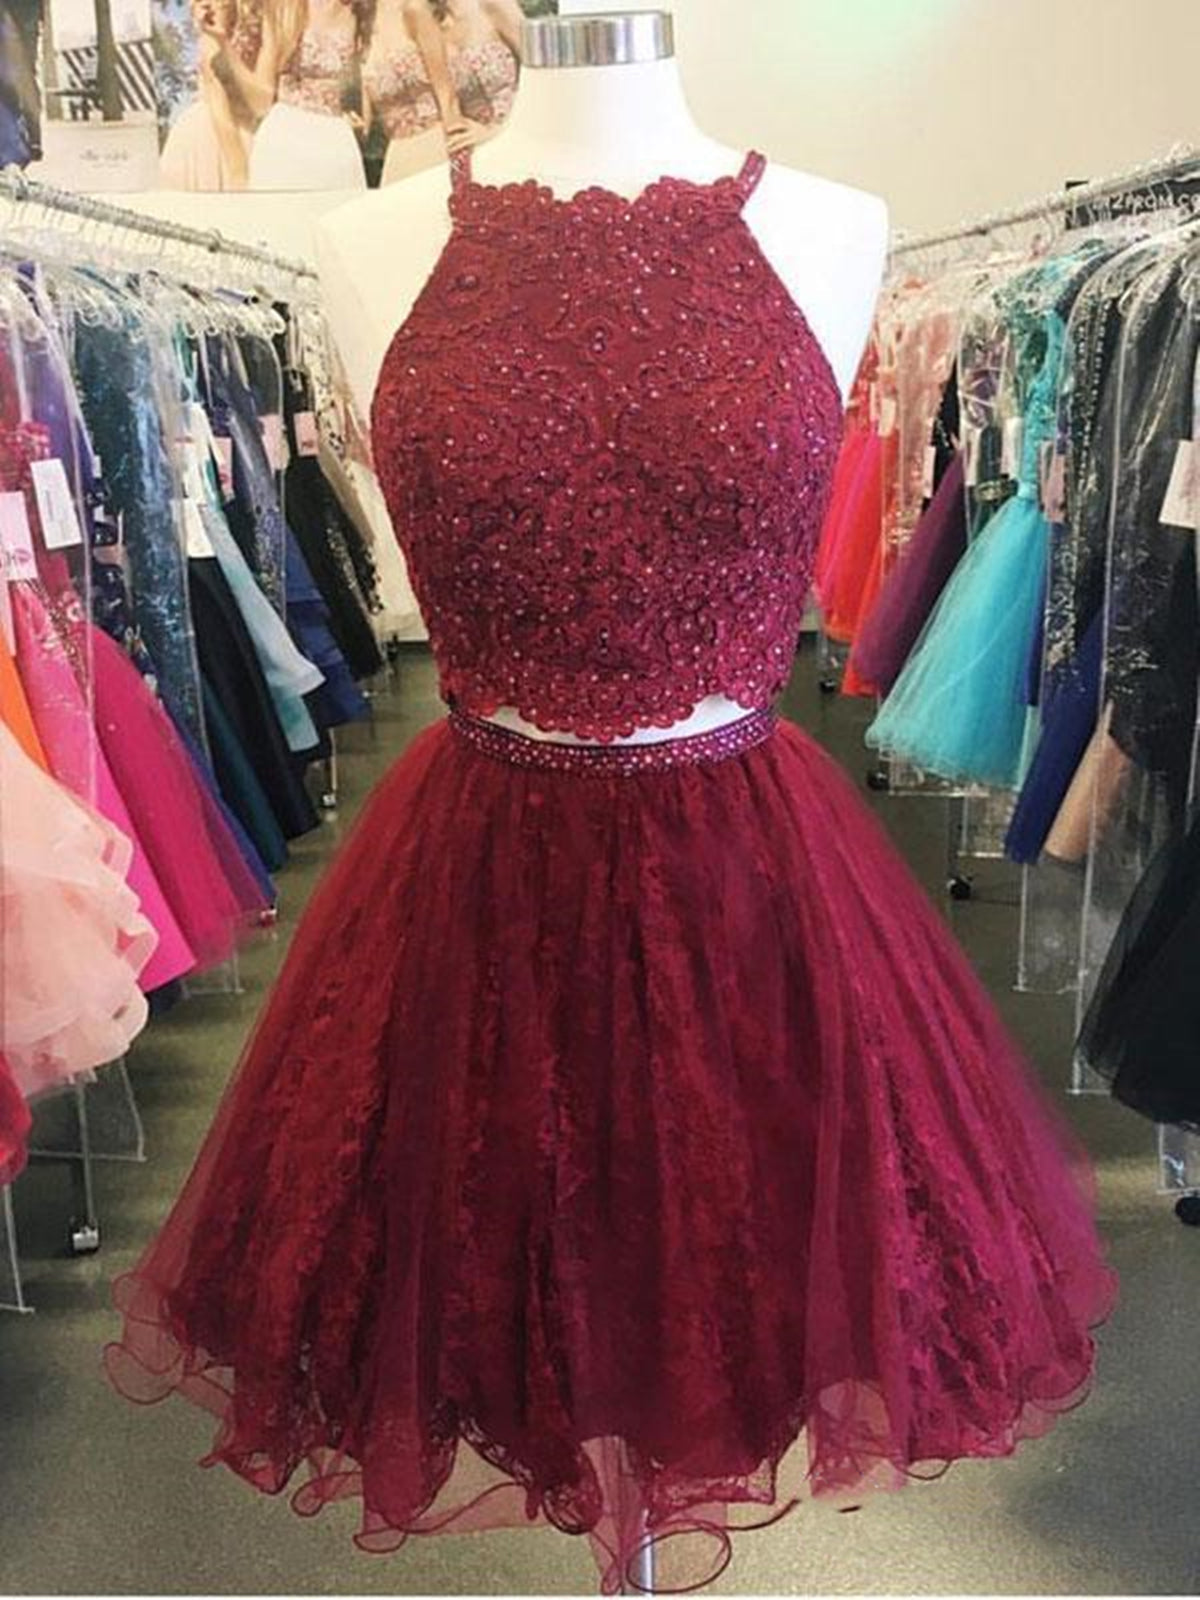 Two Pieces Short Burgundy Lace Corset Prom Dresses, Wine Red 2 Pieces Short Lace Corset Formal Corset Homecoming Dresses outfit, Formal Dresses Prom